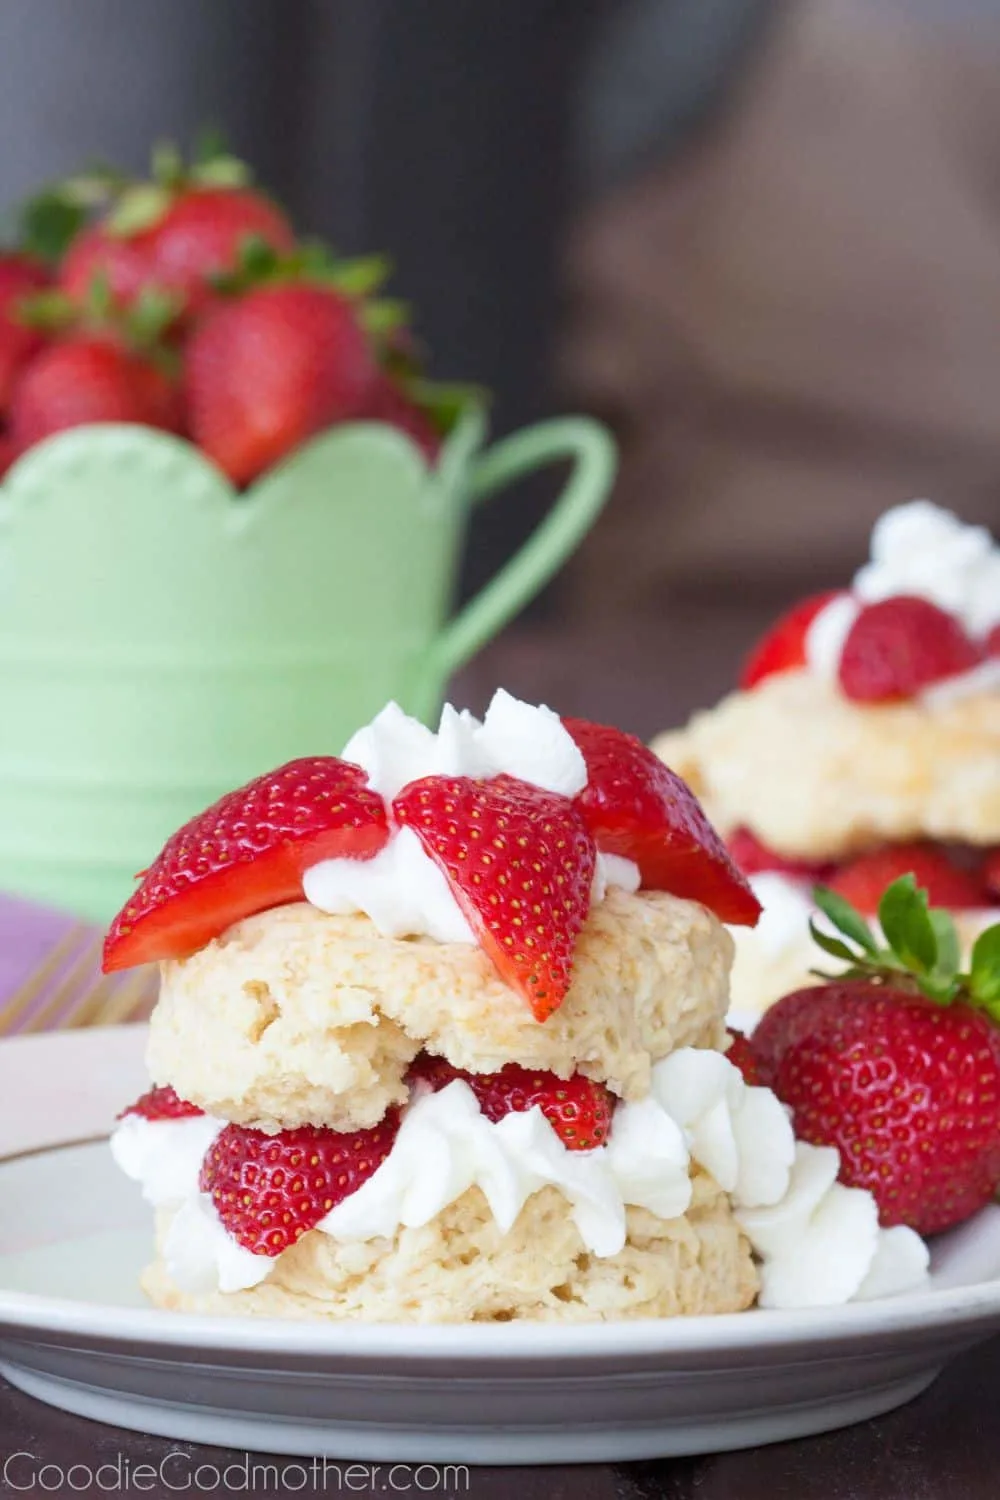 Easy strawberry shortcake recipe for summer! Perfectly textured shortcake layered with homemade whipped cream and bright red strawberries!